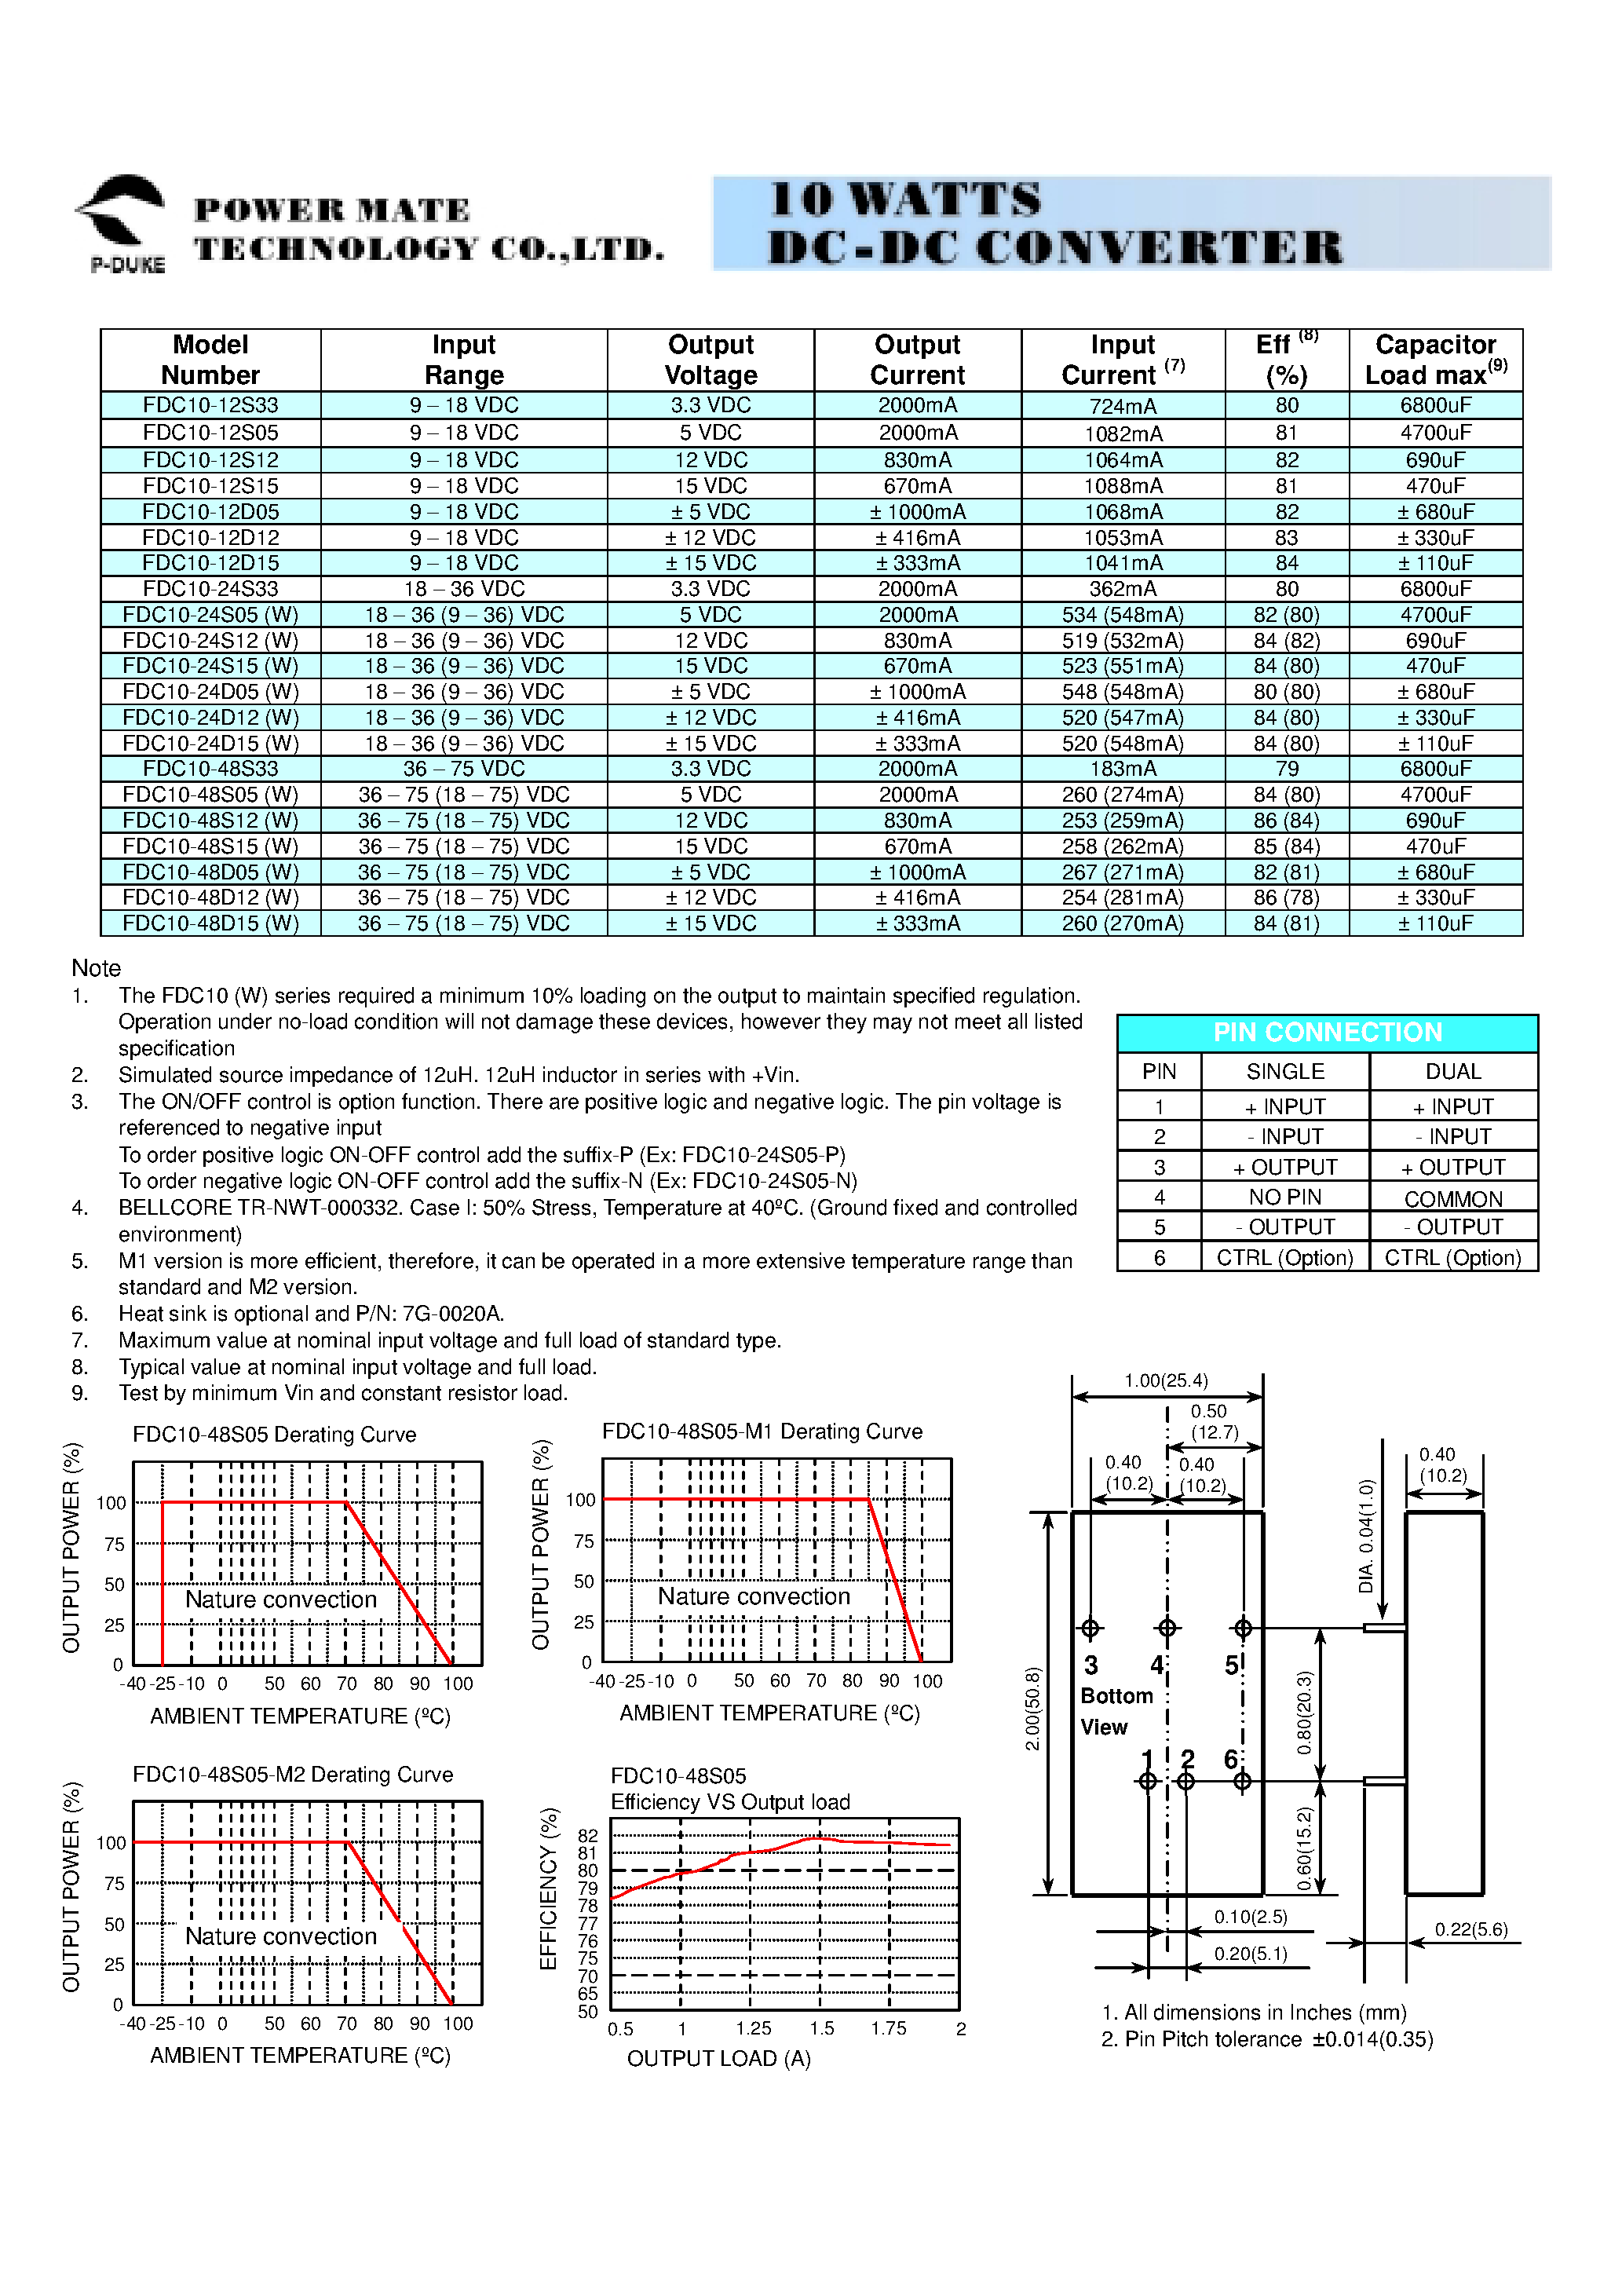 Datasheet FDC10 - 10 watts of output power from a 2 x 1 x 0.4 inch package page 2